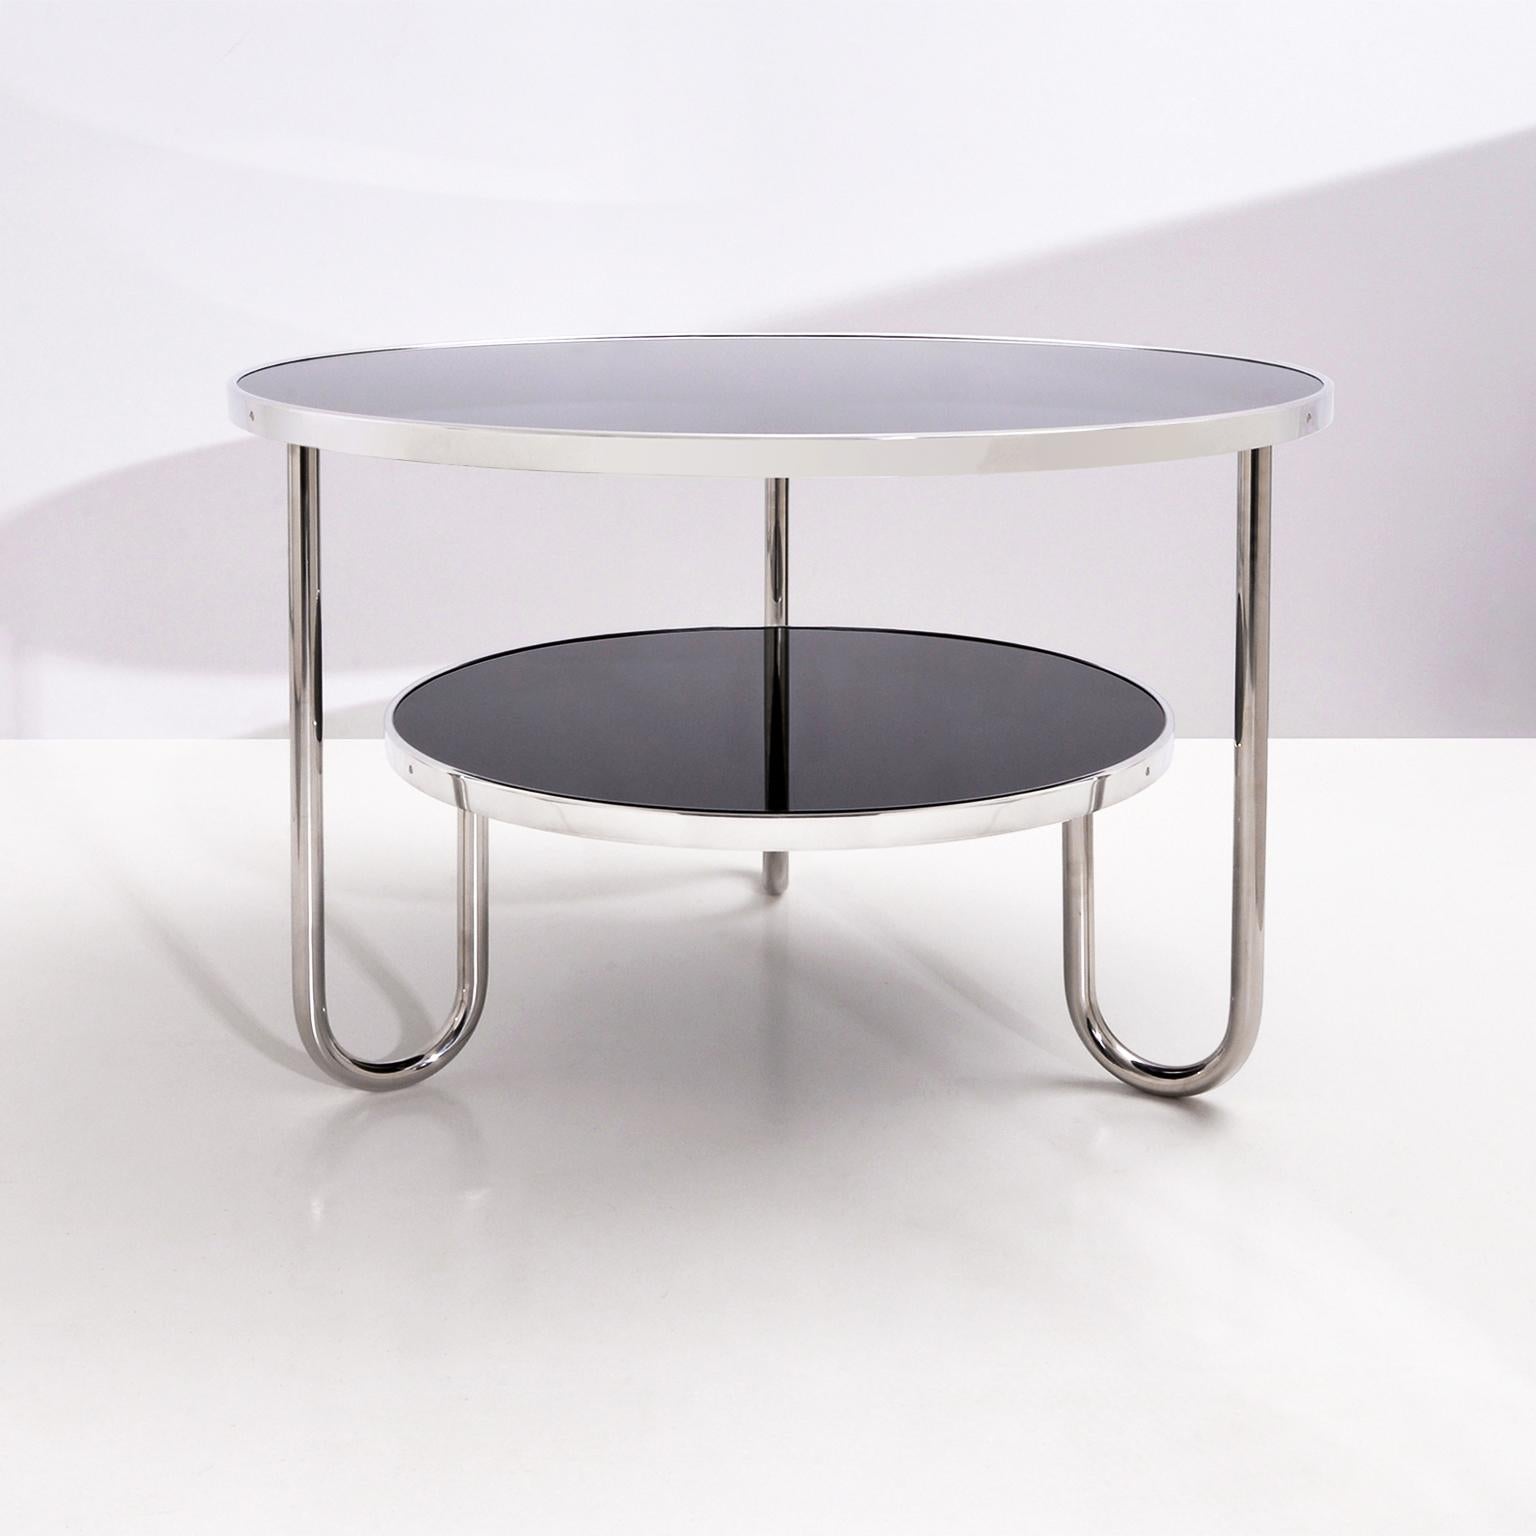 Modernist round coffee table Model TC 2 designed and manufactured by GMD Berlin. Chromium plated tubular steel and glass tops with aluminium profiles, Germany, 2019.